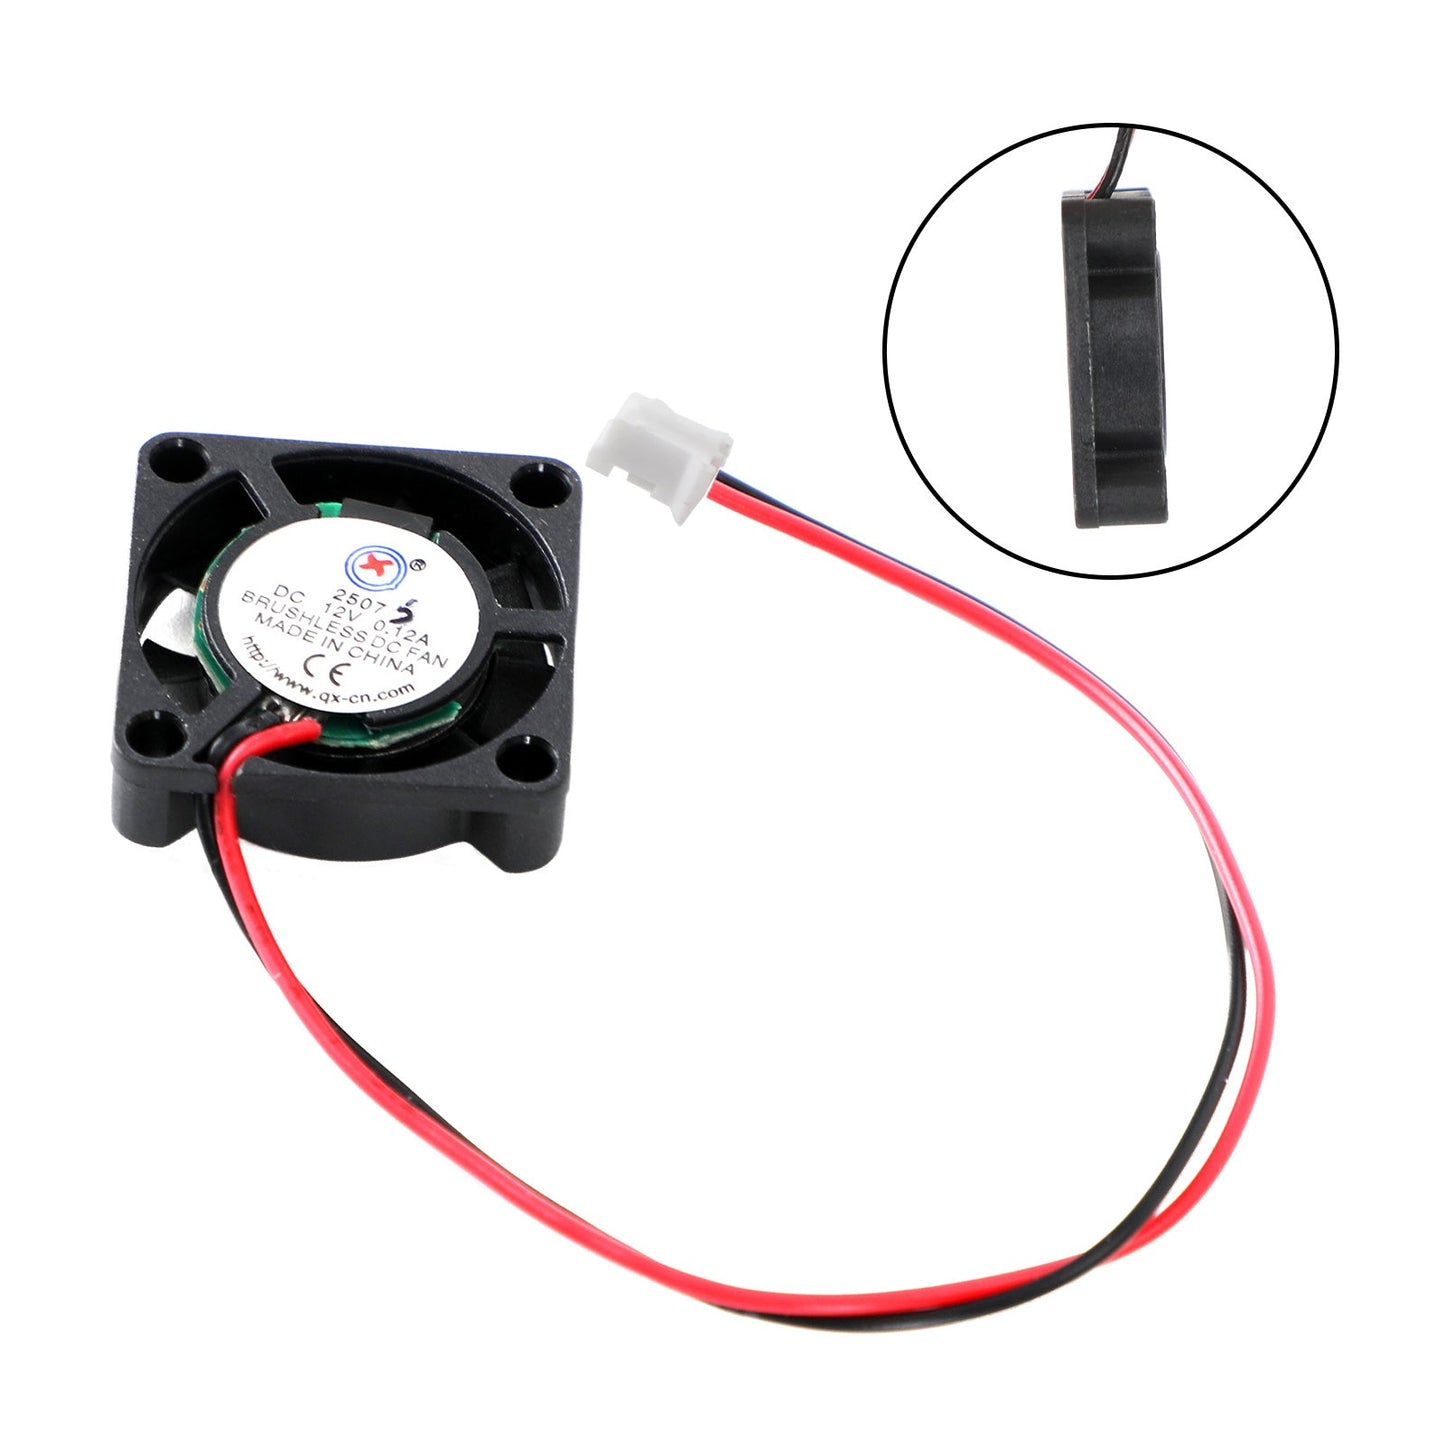 1Pc Brushless DC Cooling Blower Fan 12V 0.12A 2507S 25x25x7mm Sleeve 2 Pin Wire